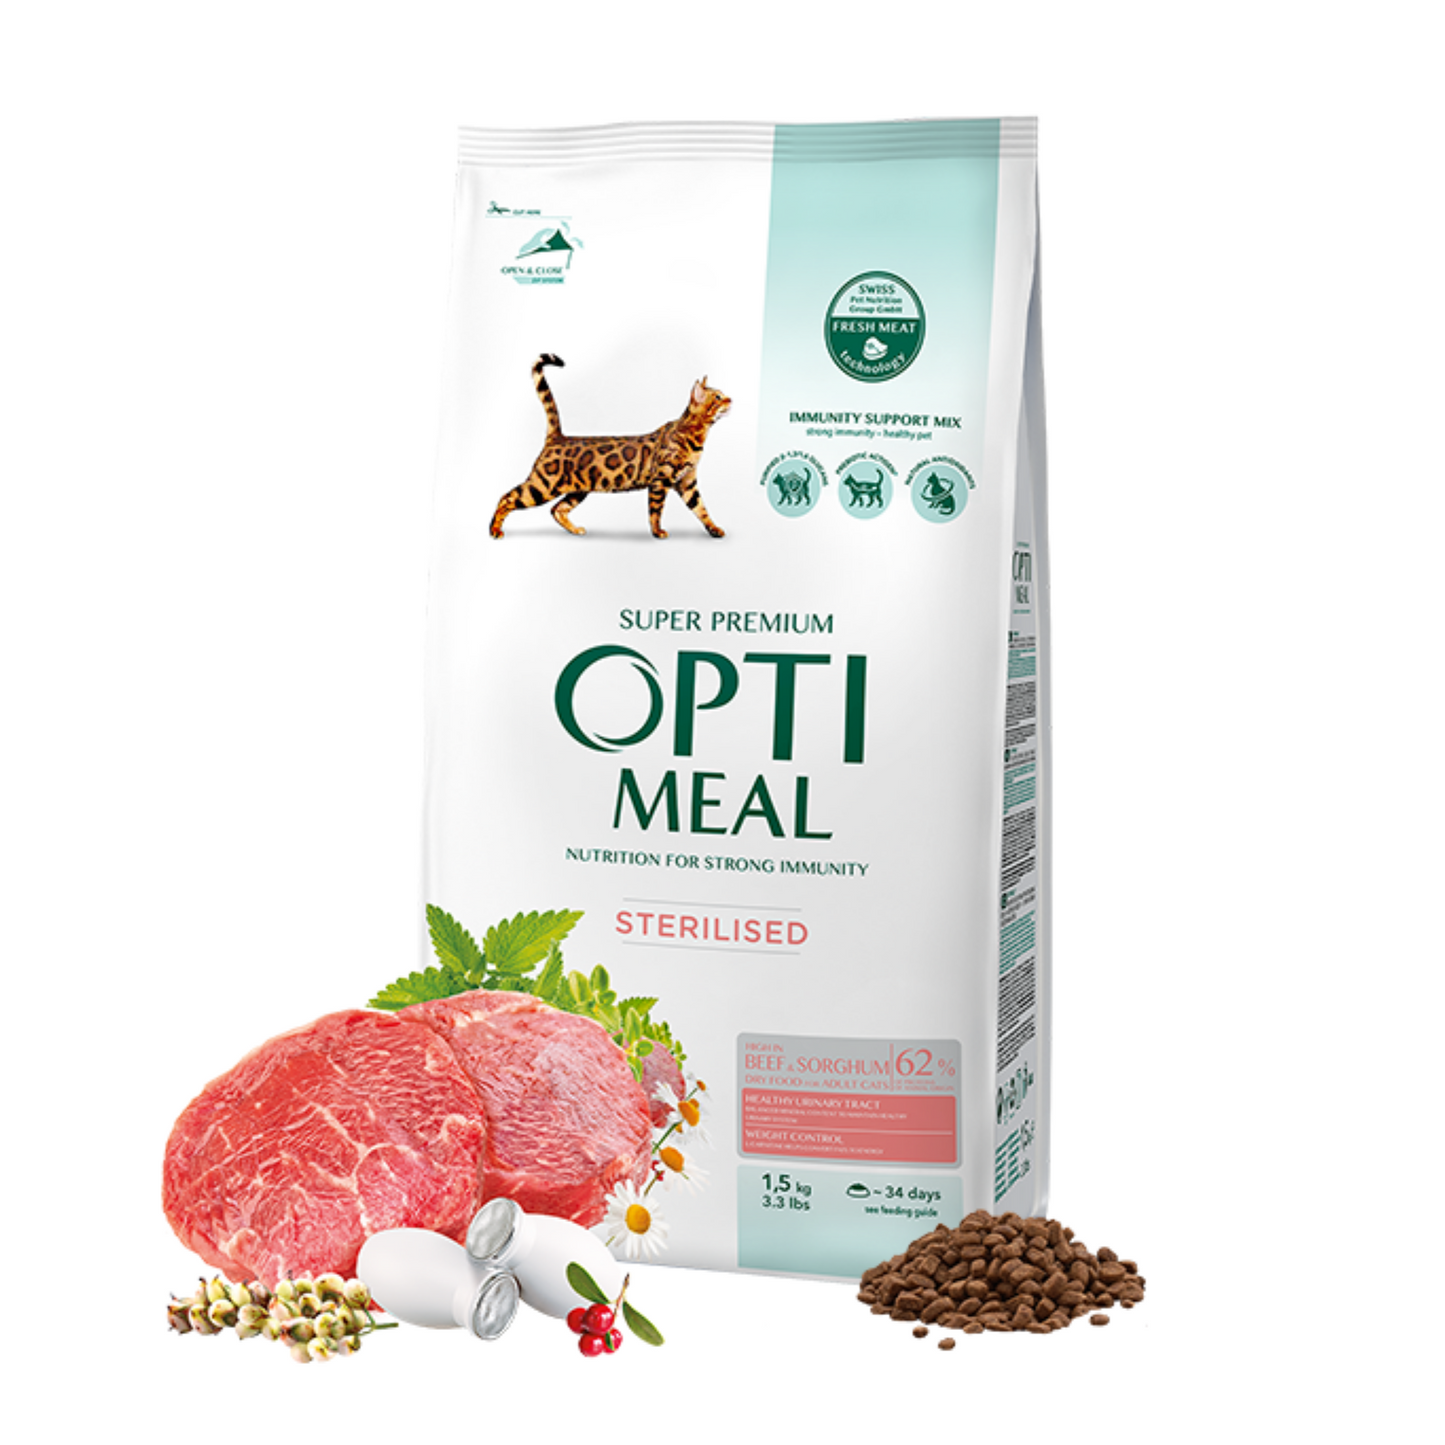 OPTIMEAL Sterilised Cats high in Beef & Sorghum